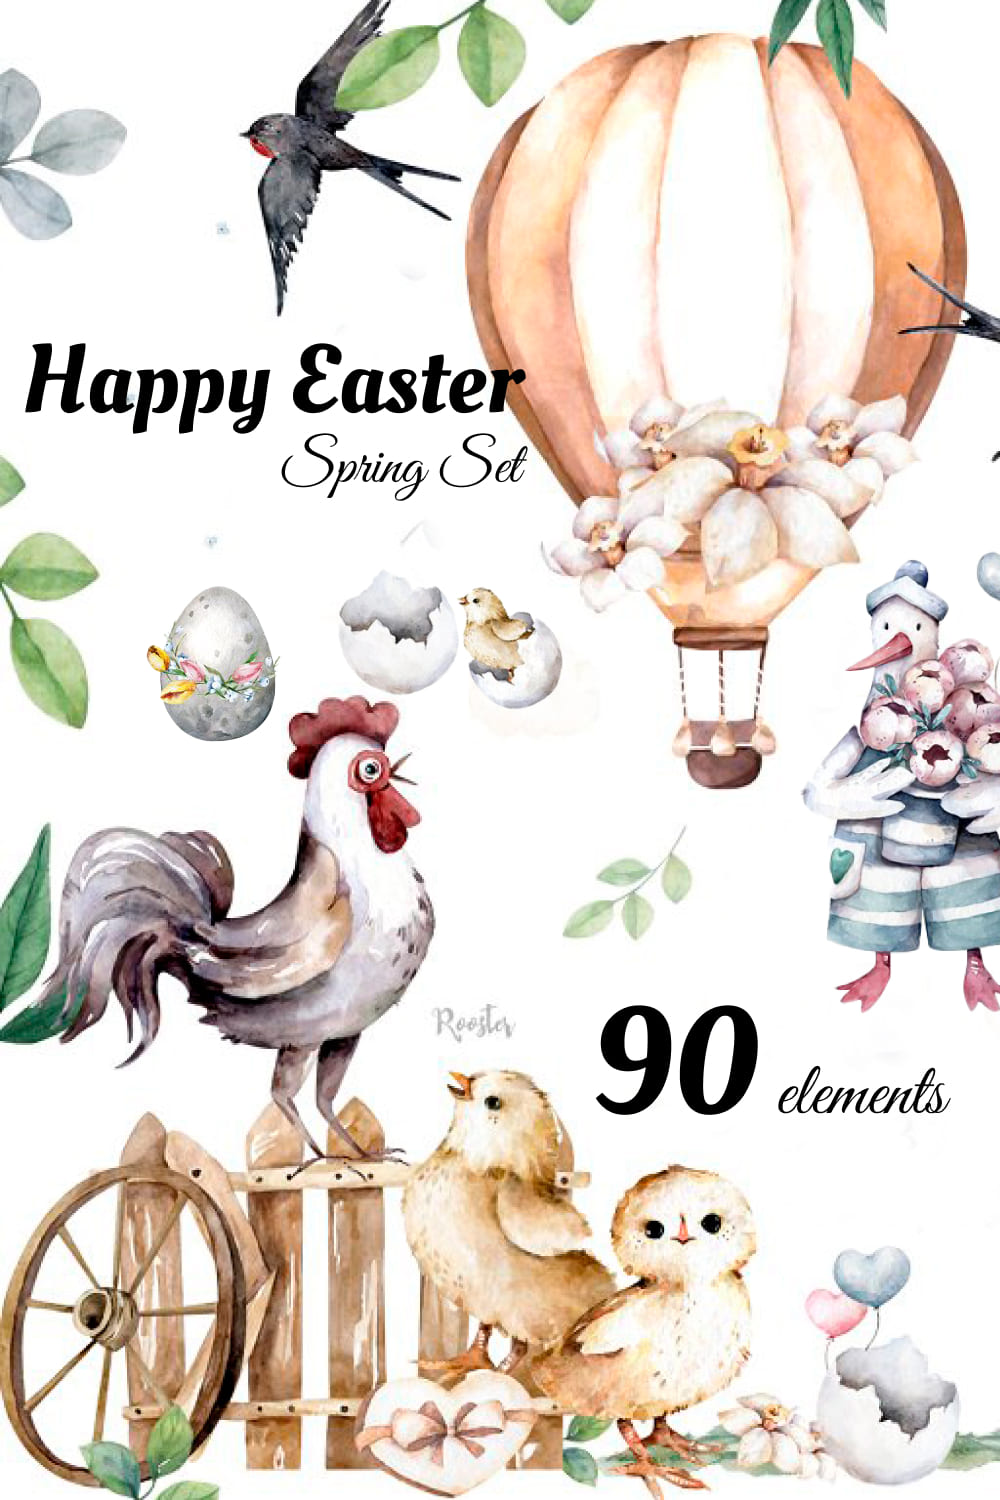 90 elements with the image of a rooster, chickens to create an Easter design.